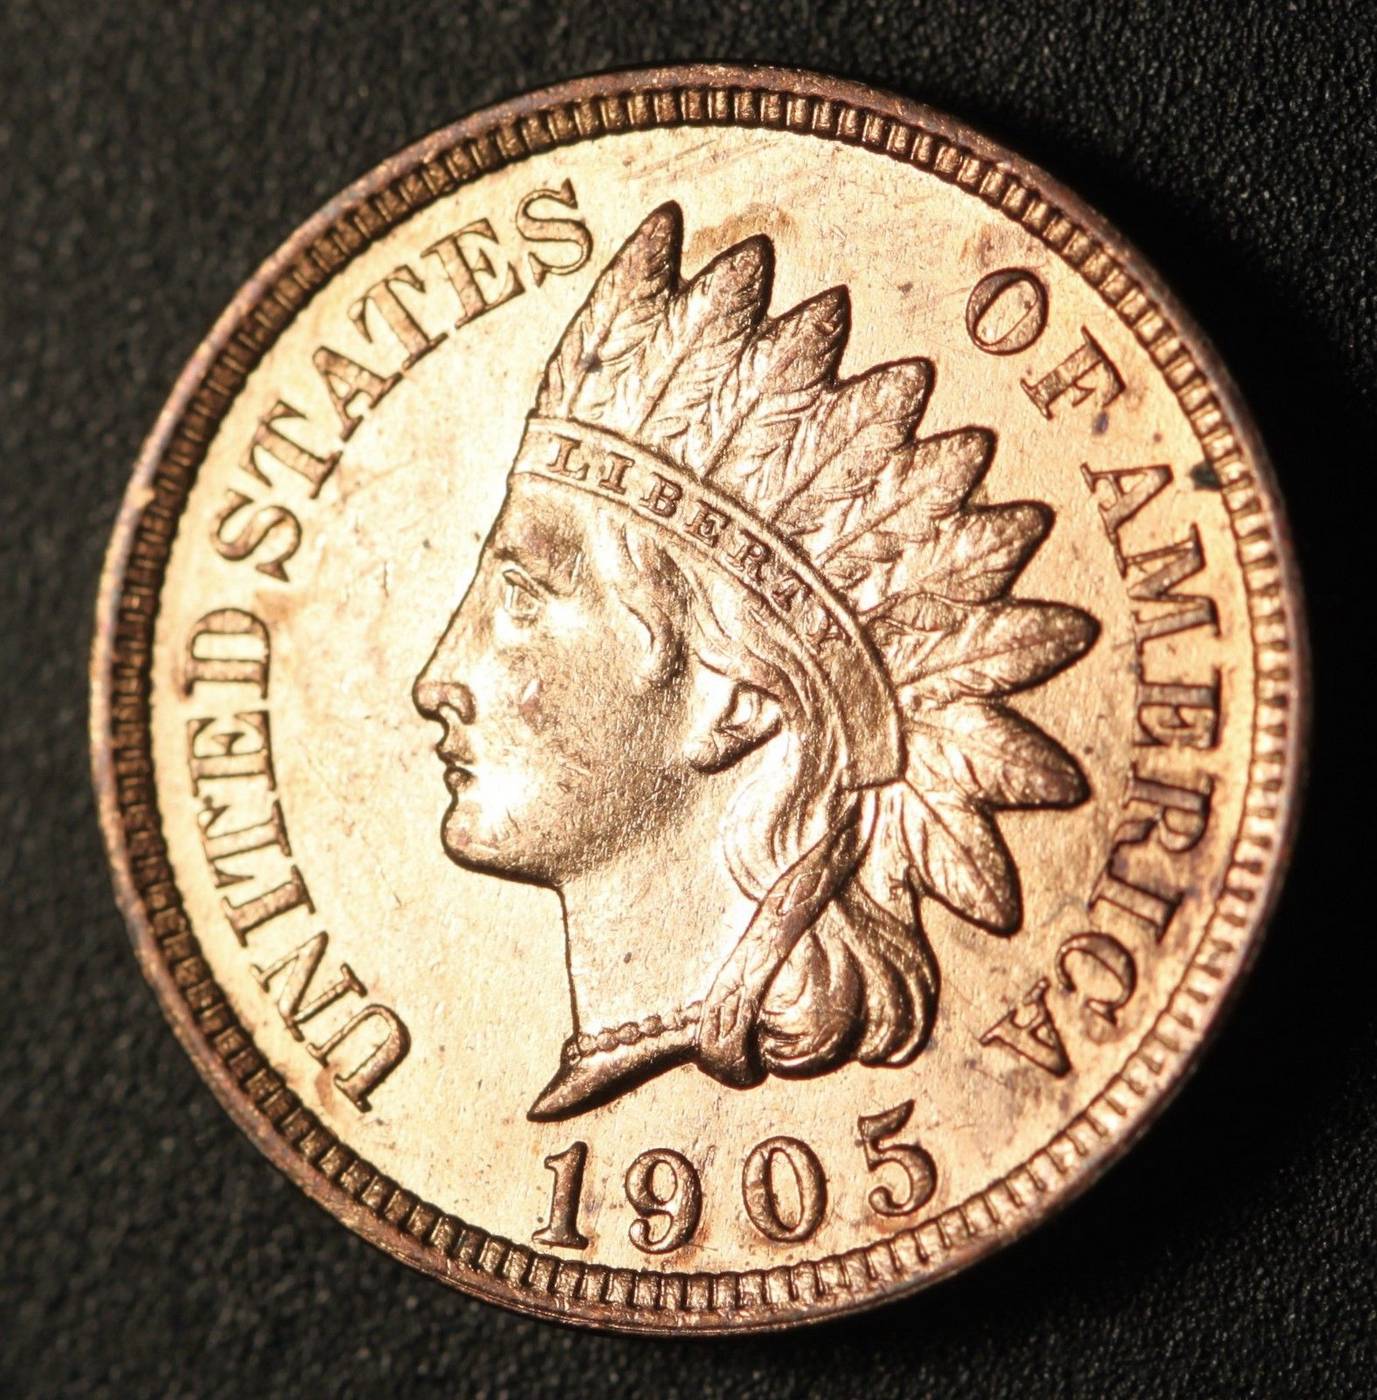 1905 RPD-009 - Indian Head Penny - Photo by Ed Nathanson